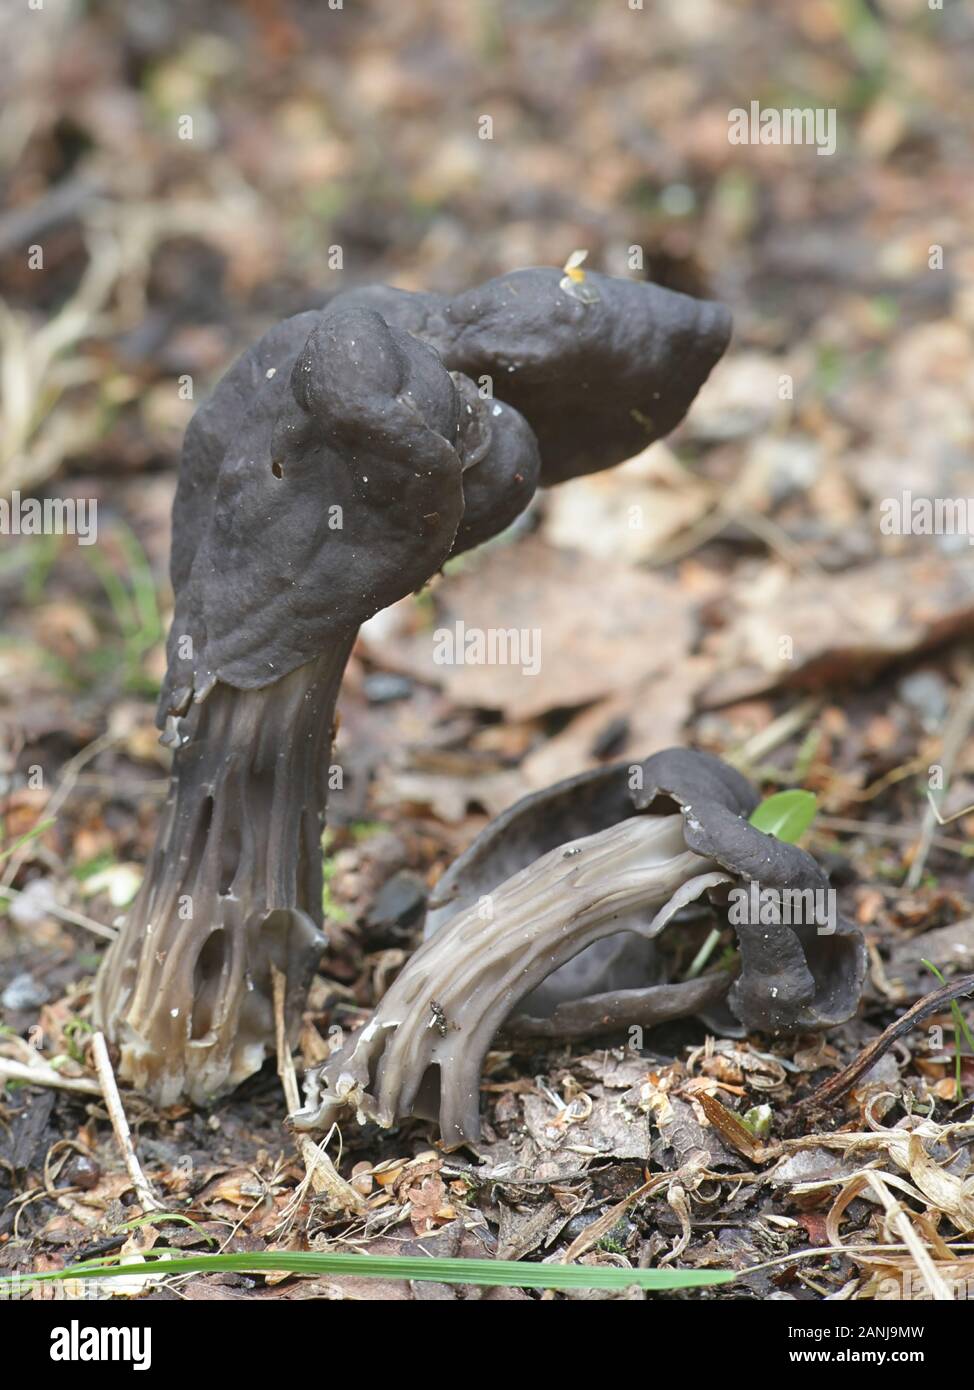 Helvella lacunosa, known as the slate grey saddle or fluted black elfin saddle, mushroom from Finland Stock Photo